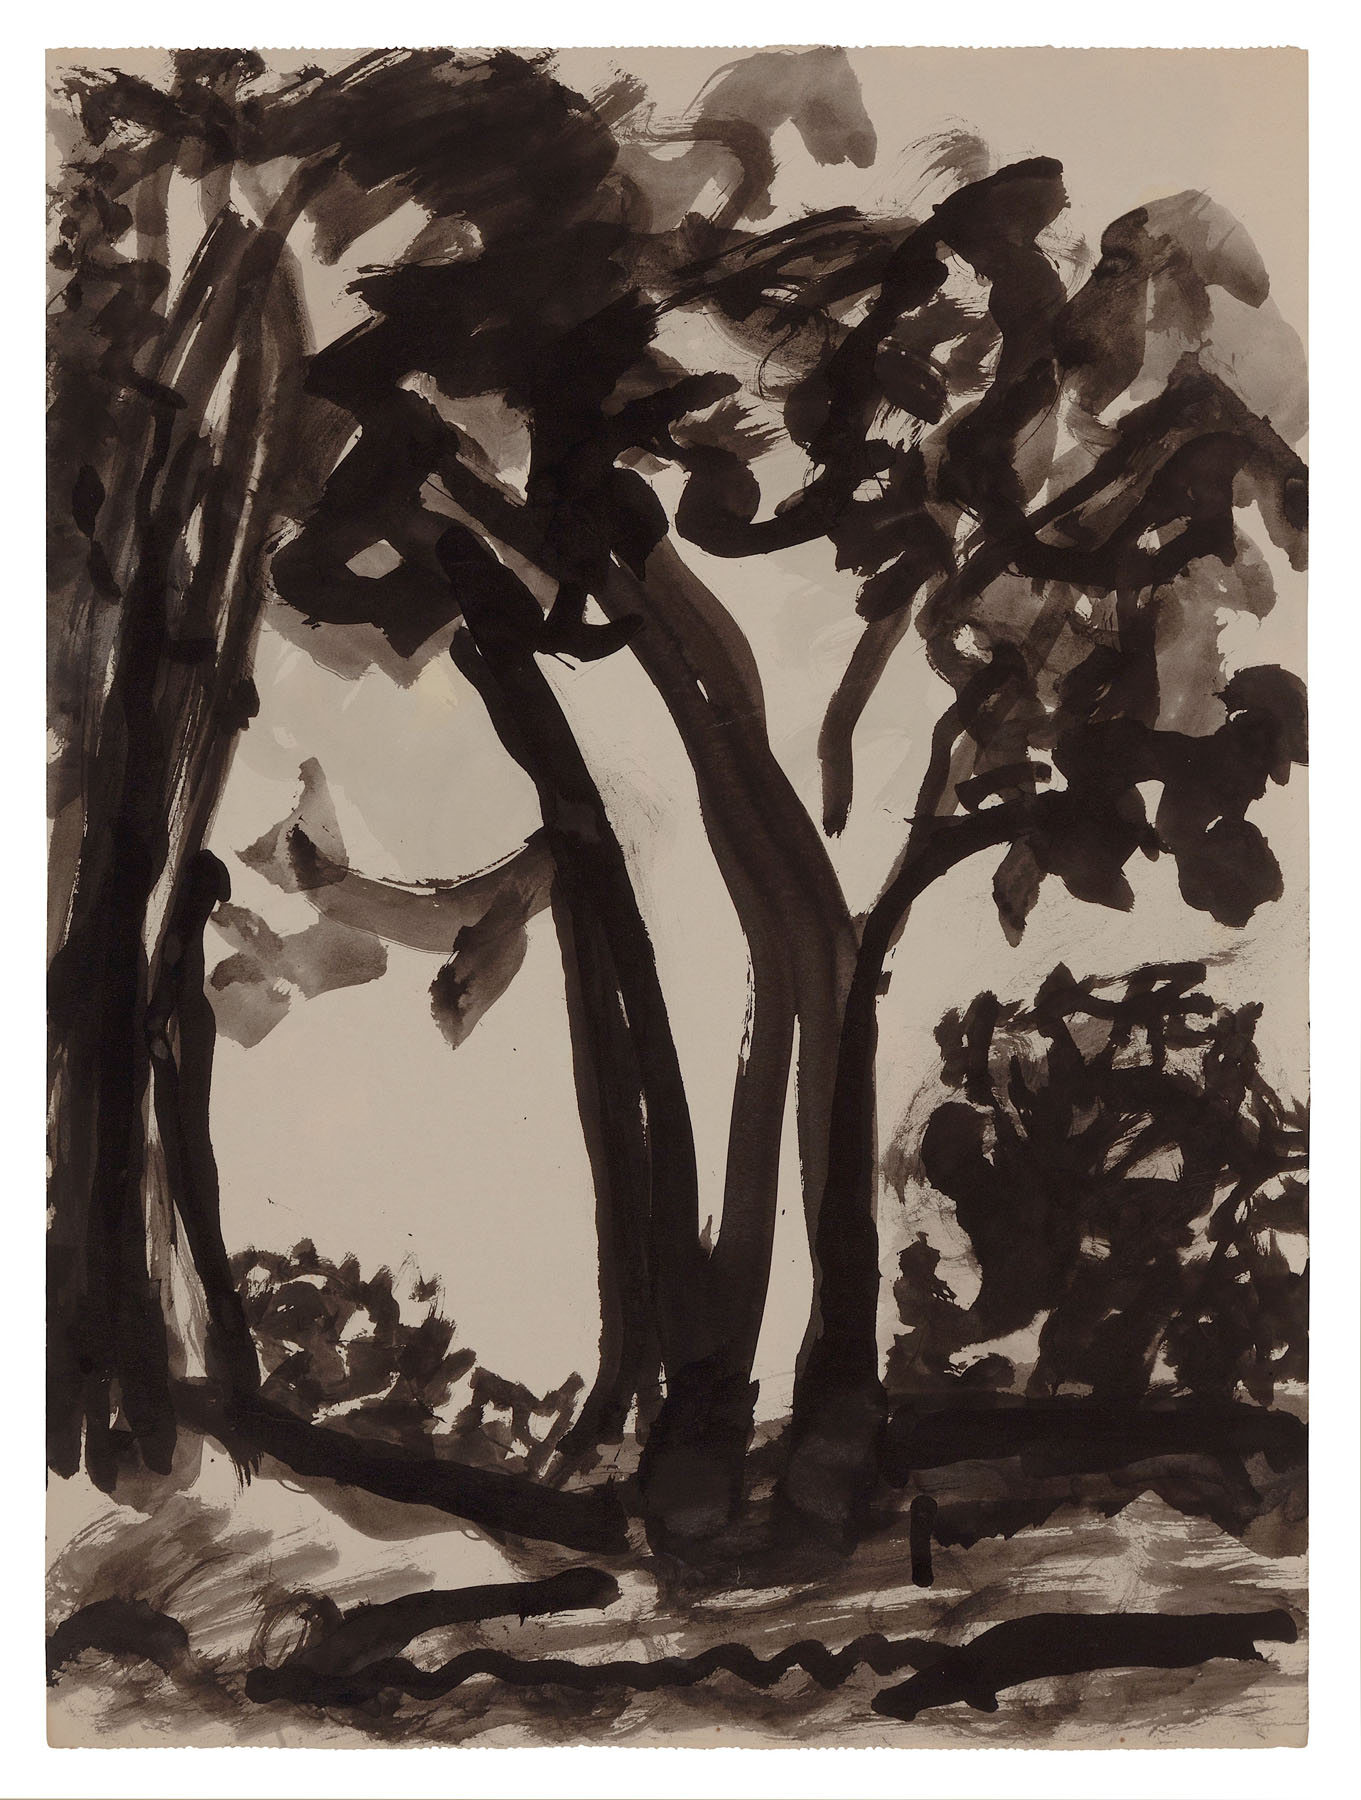 Trees, c. 1960. Black ink on paper, 15.7 x 11.6 in. (40 x 29.5 cm). Private collection. Photo Malcolm Varon ©Bianca Stock